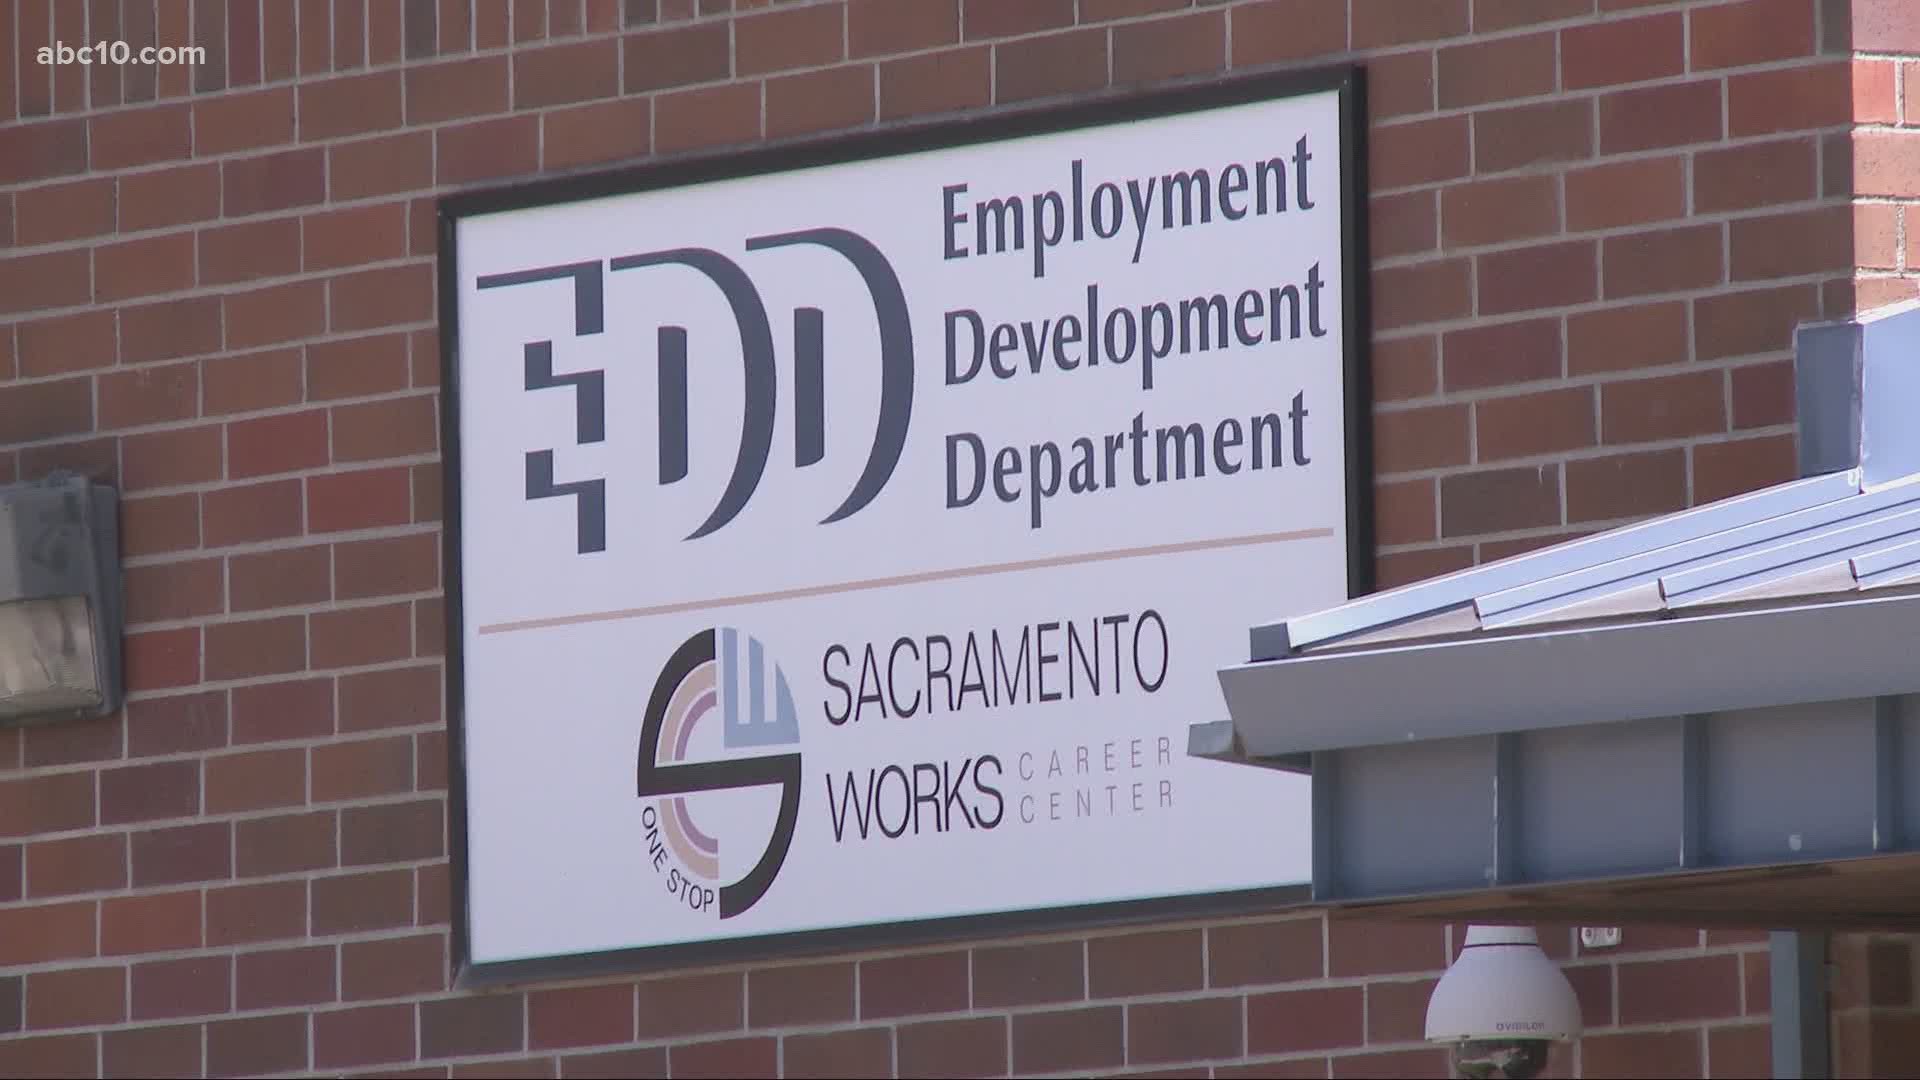 While the Employment Development Department has worked on improvements with call centers and staffing, people are still saying they are unable to get through.